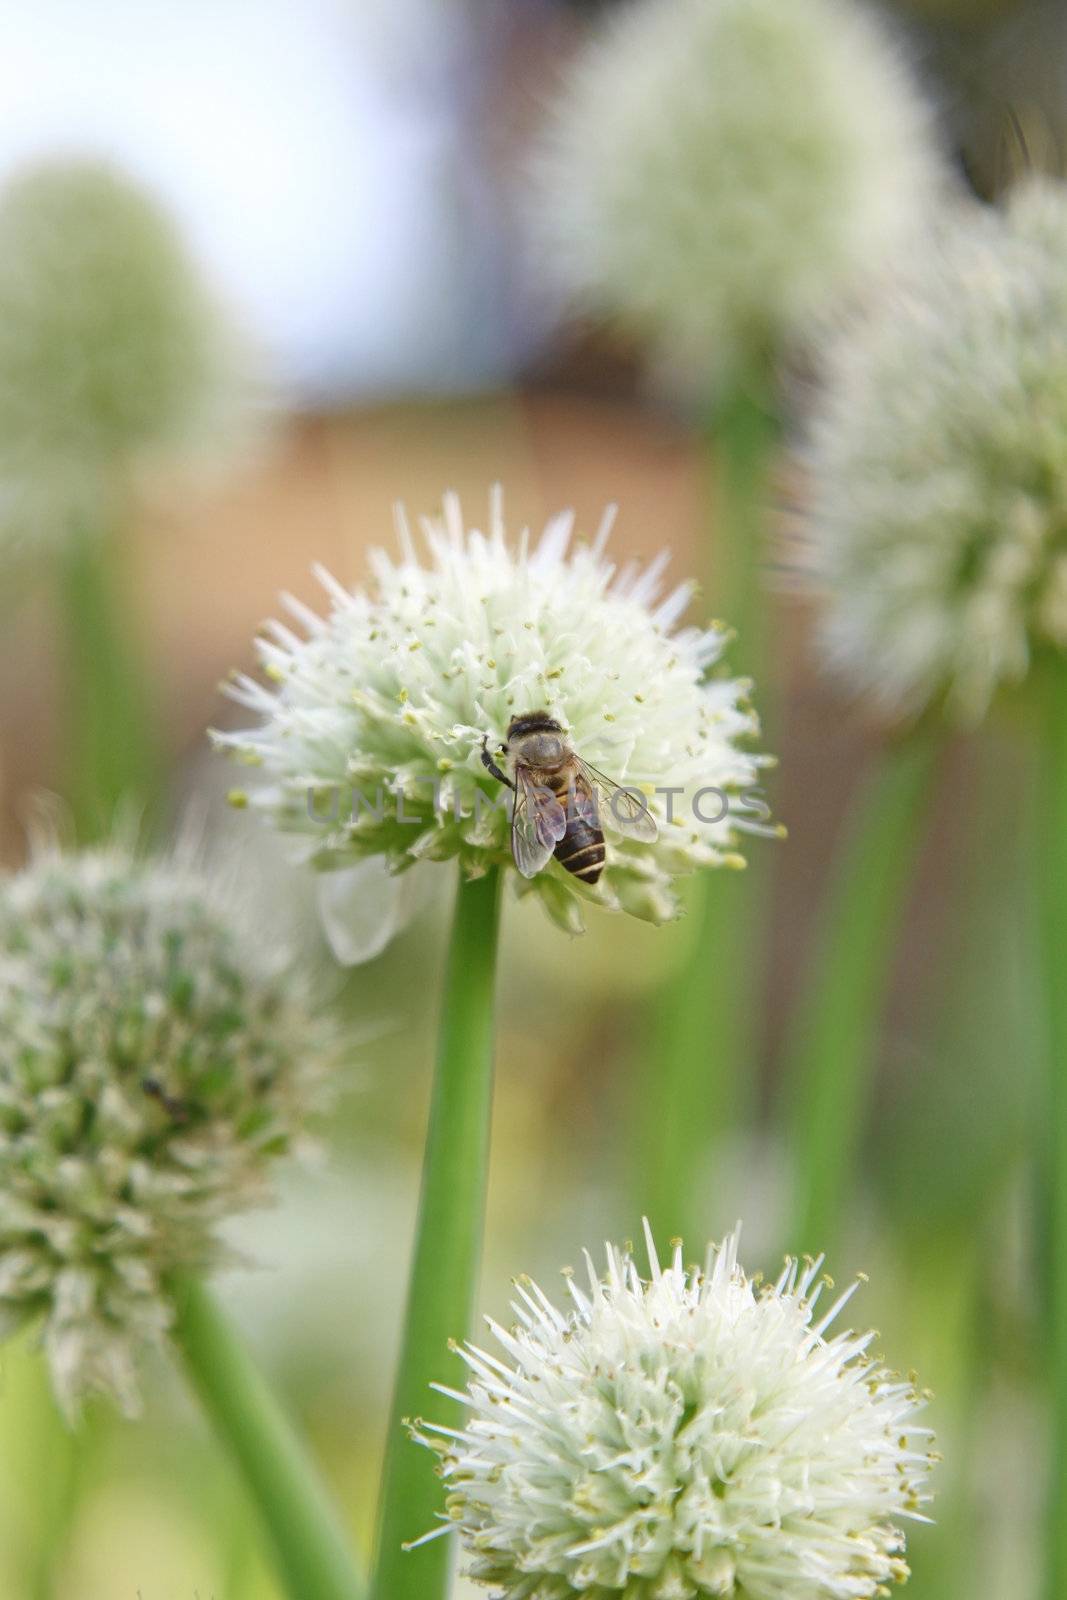 Onion flowers with bee by kawing921